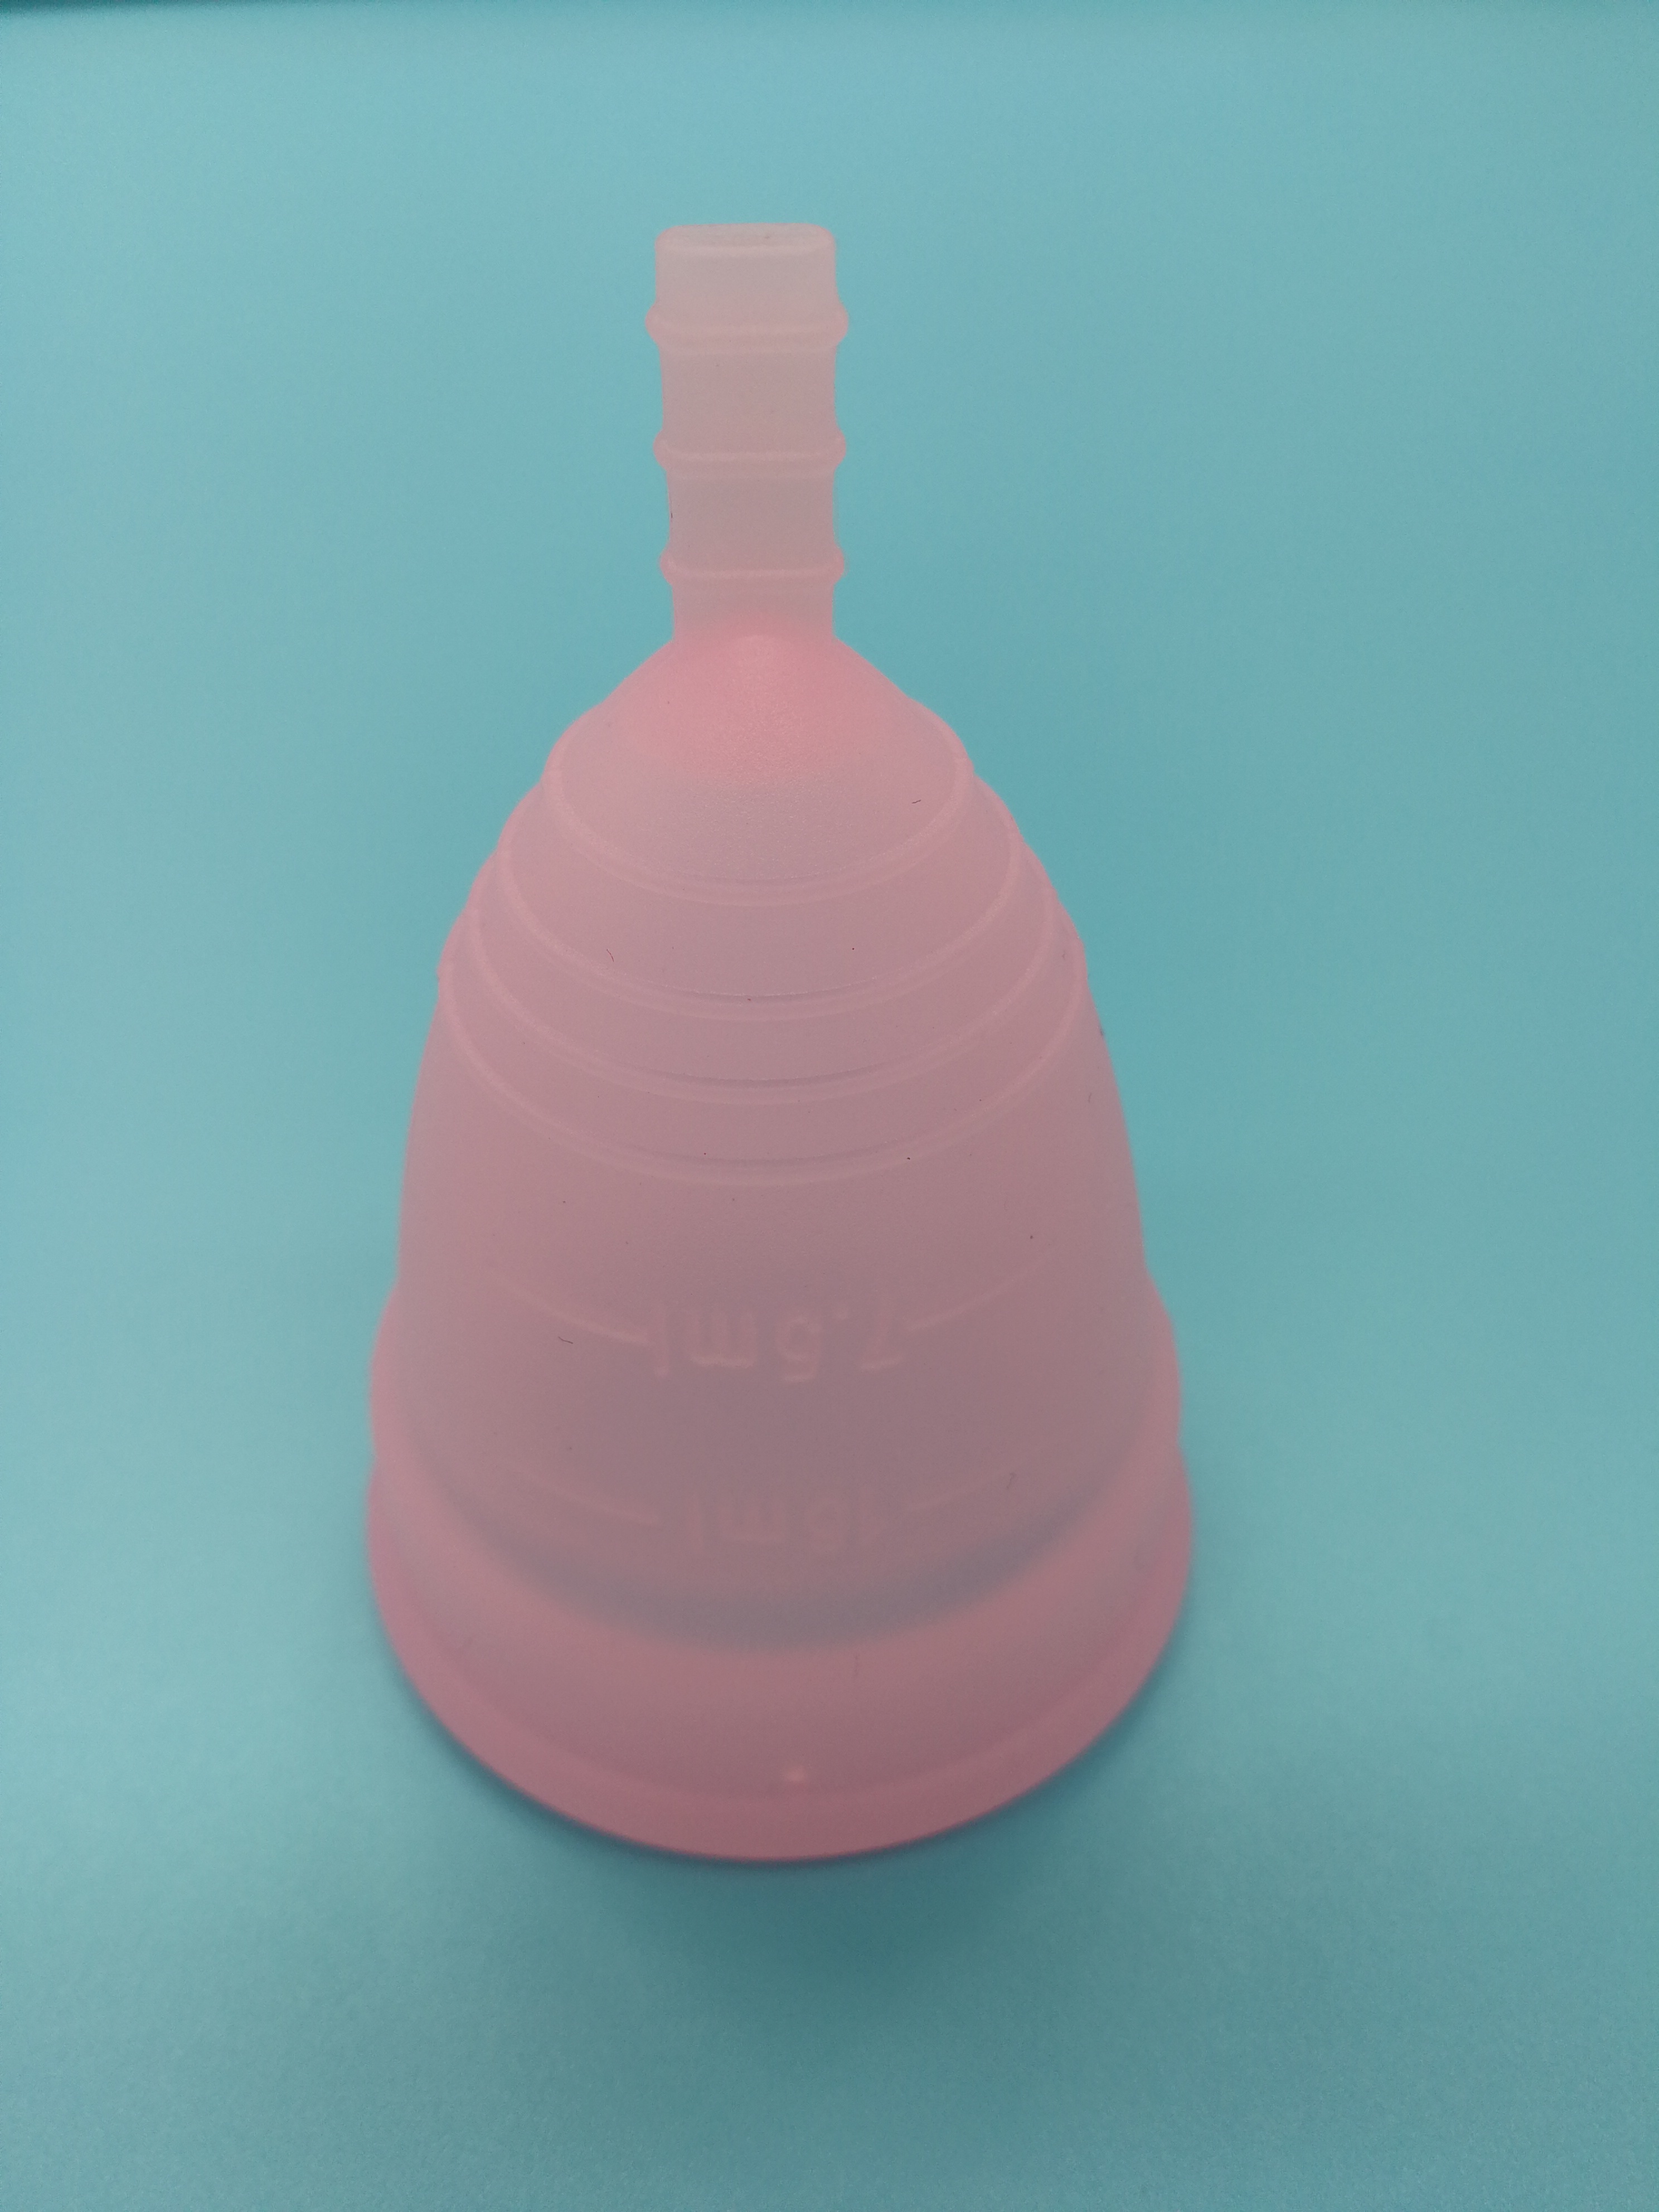 2019 High quality Cup For Menstruation – Eco Friendly Menstrual Cups Female Cup Silicone Soft Private Label Medical Copa Menstruation Cup – Zichen